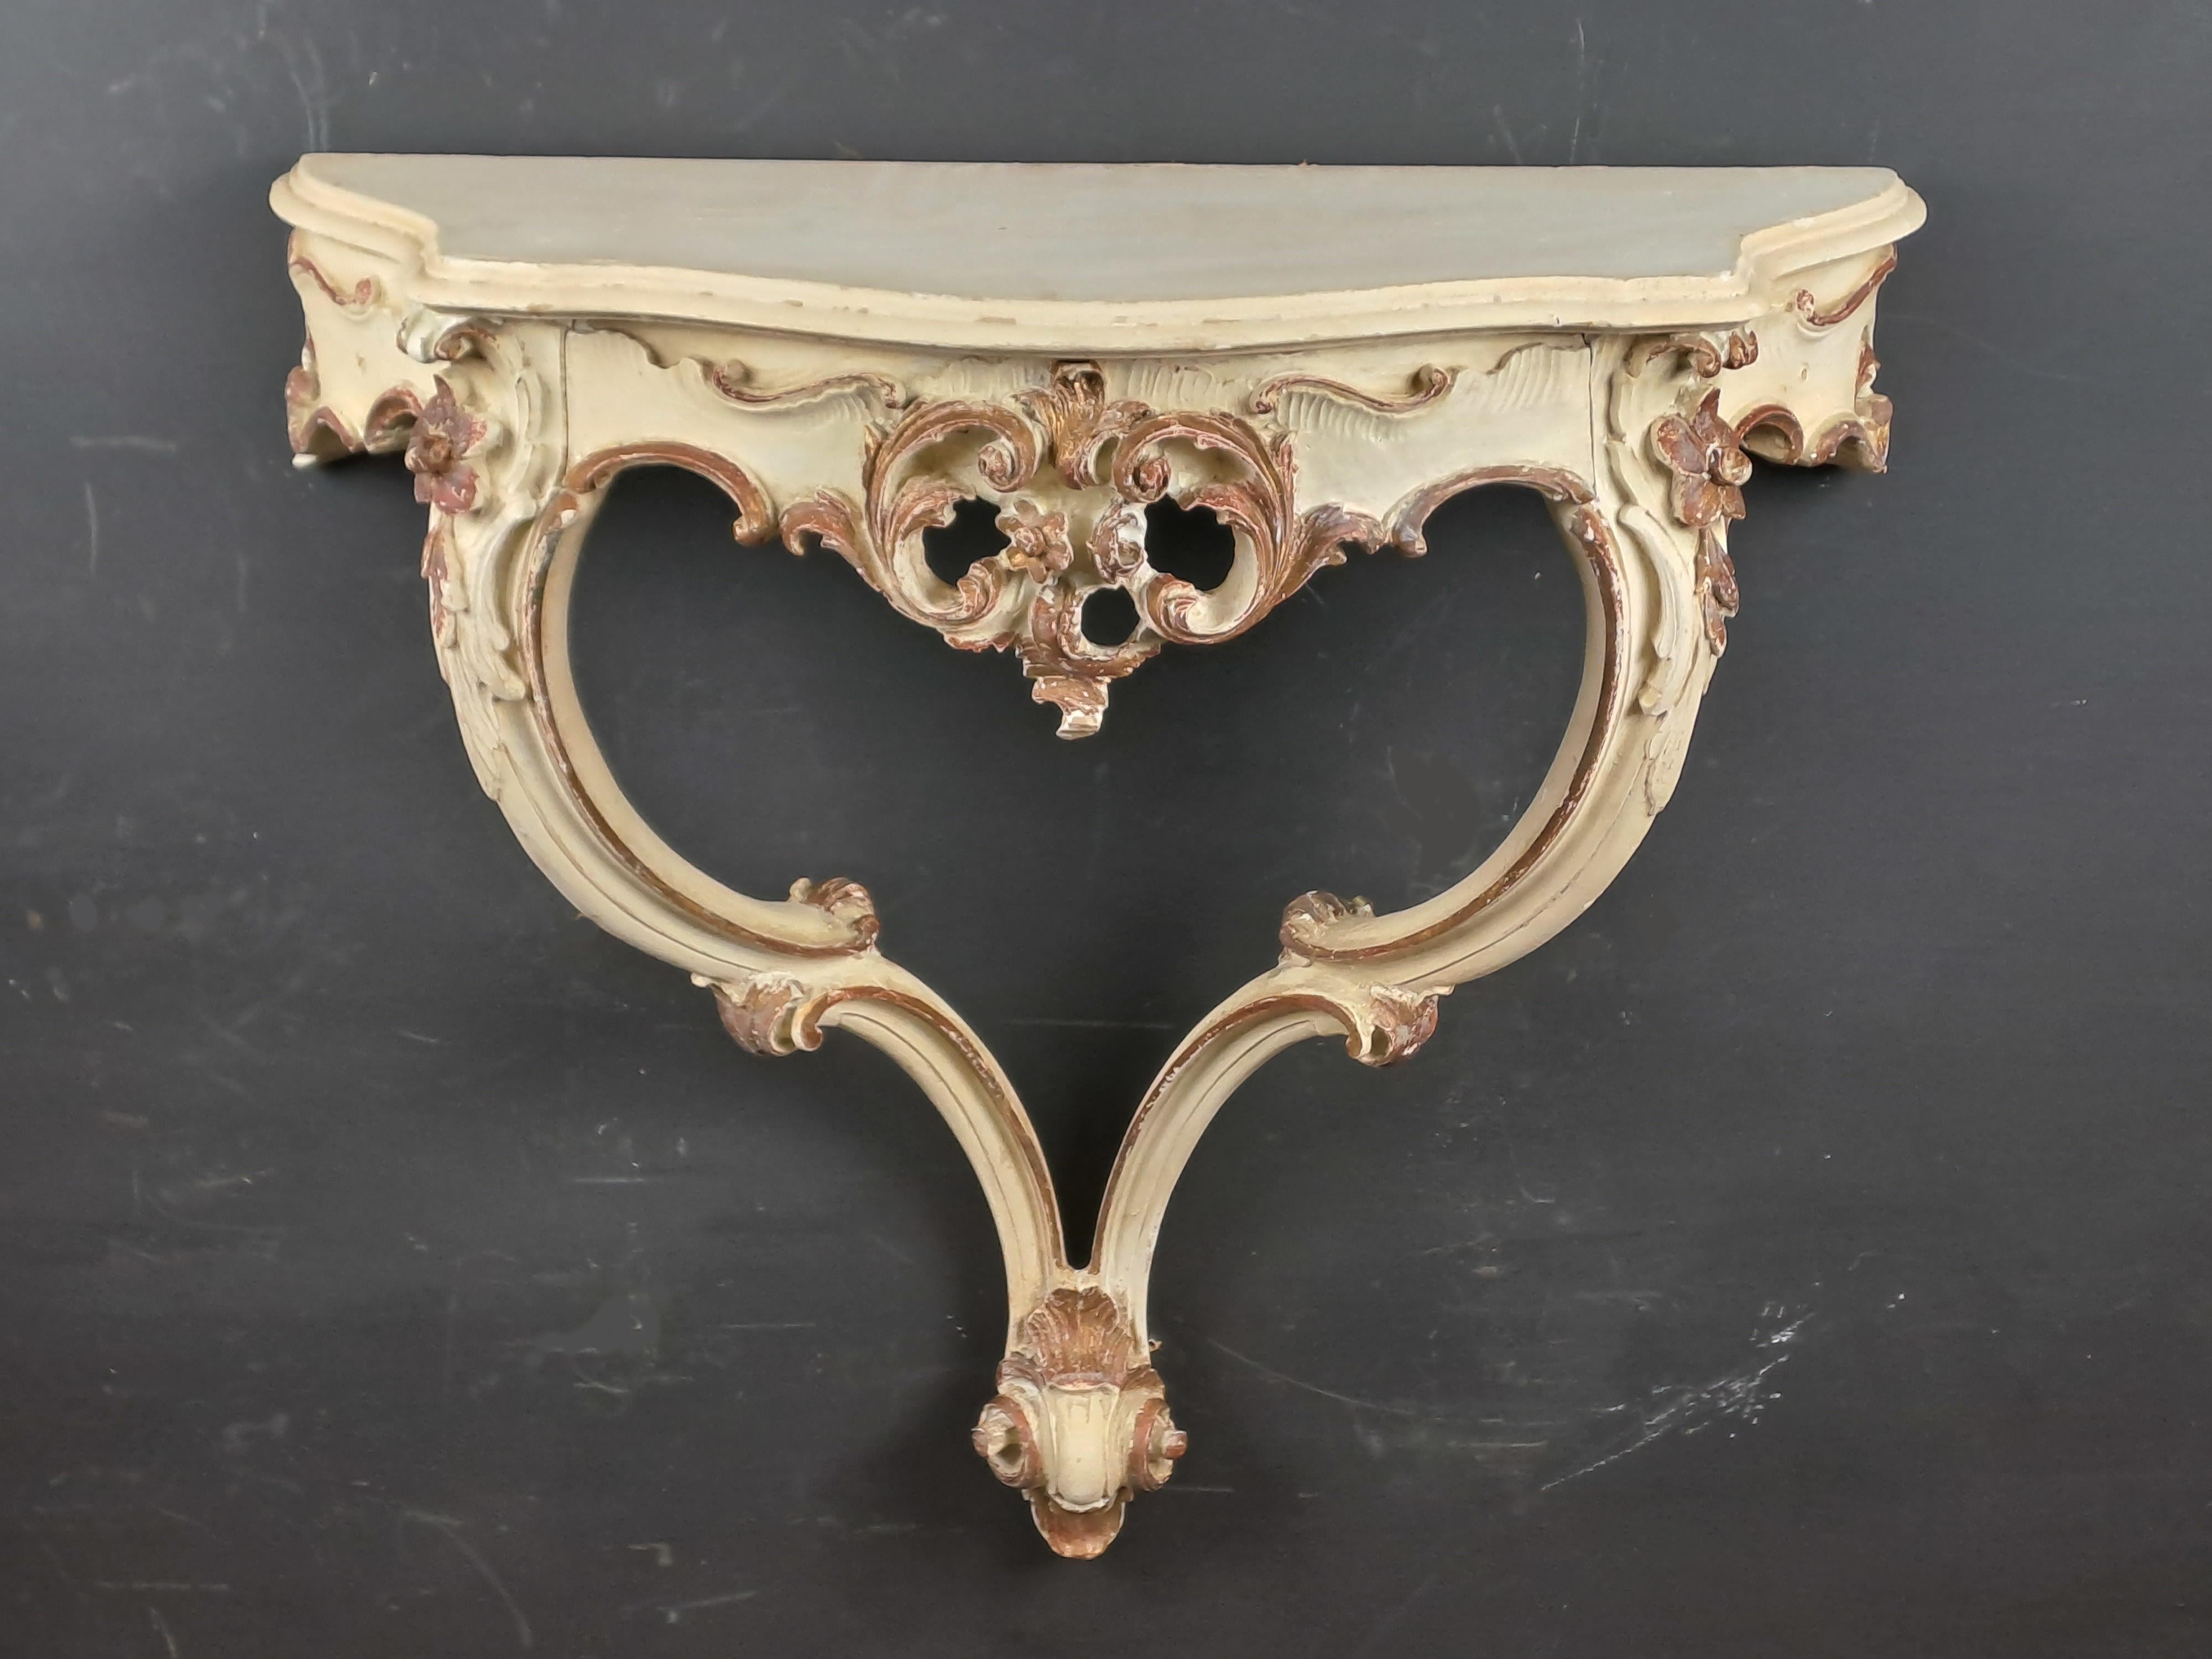 Charming little Louis XV Rocaille style wall console in cream lacquered wood and gold accents.
Generous carved decoration of acanthus leaves, flowers and foliage.
Opening a drawer.

French or Italian work around 1950.

Perfect proportions and